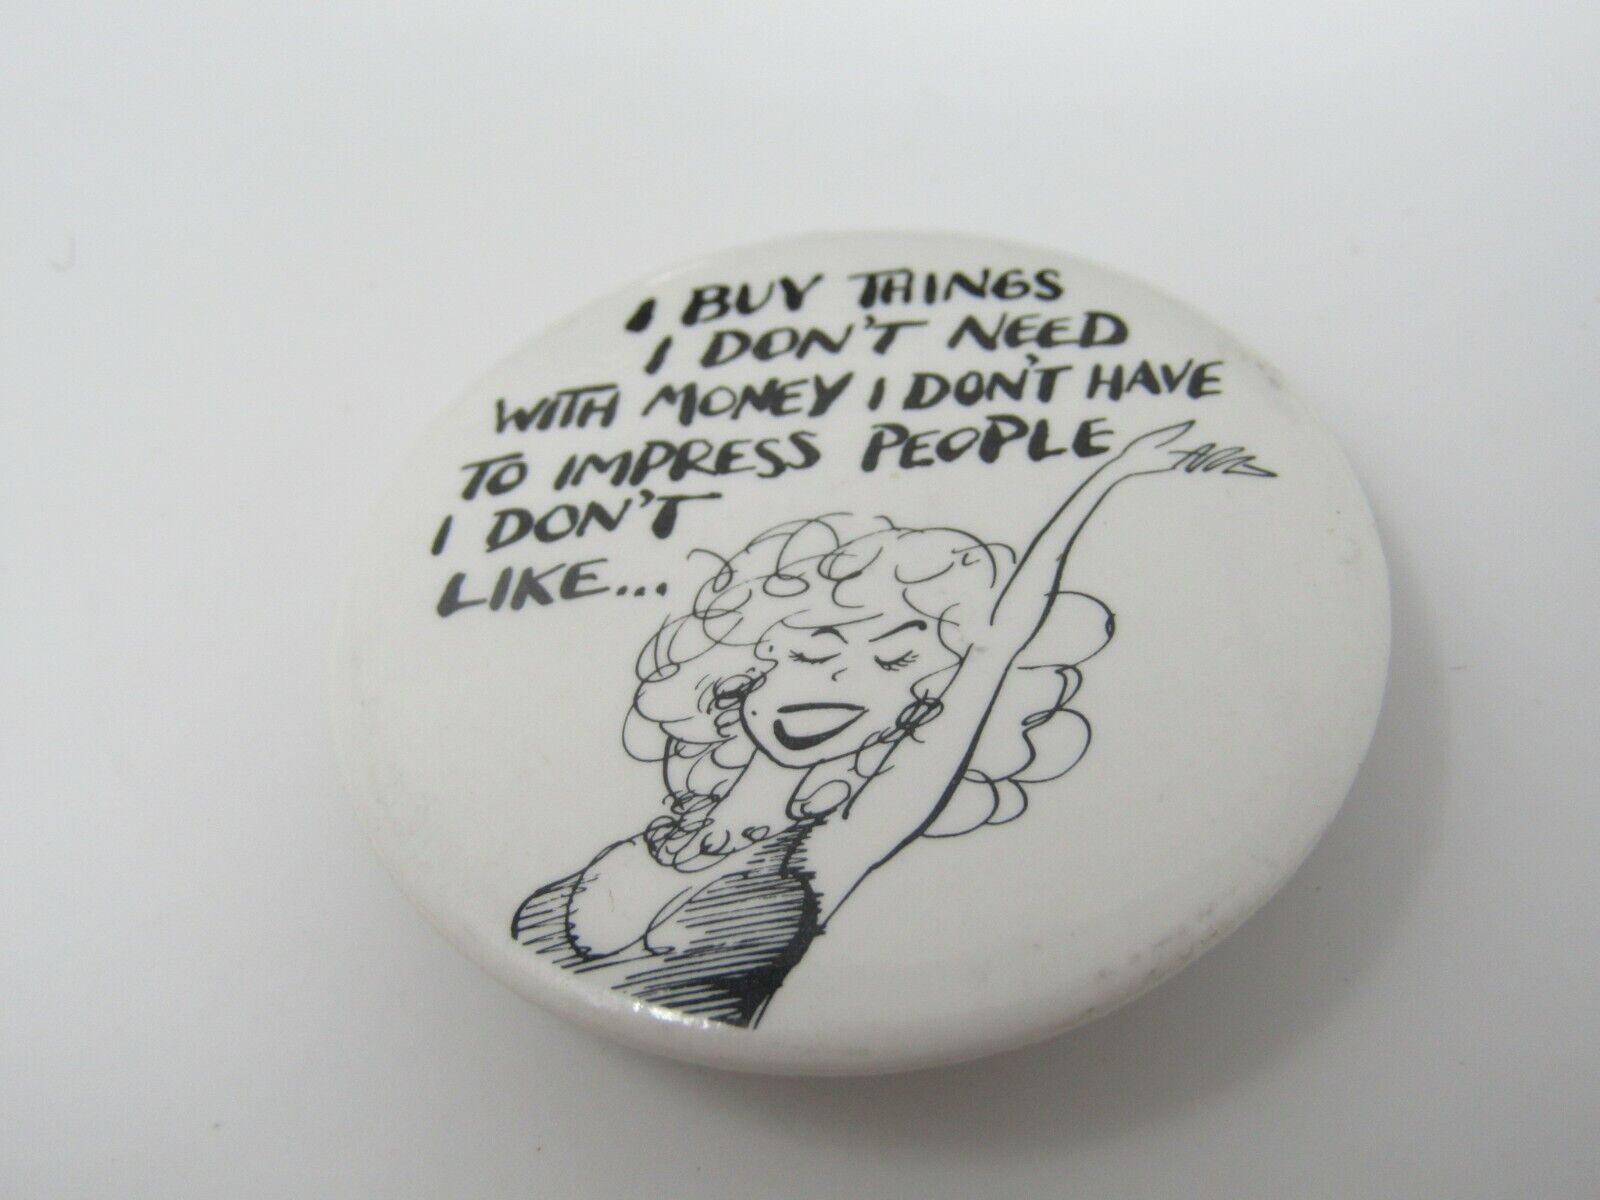 I Buy Things I Don't Need With Money Have Pin Button Funny Humor | eBay